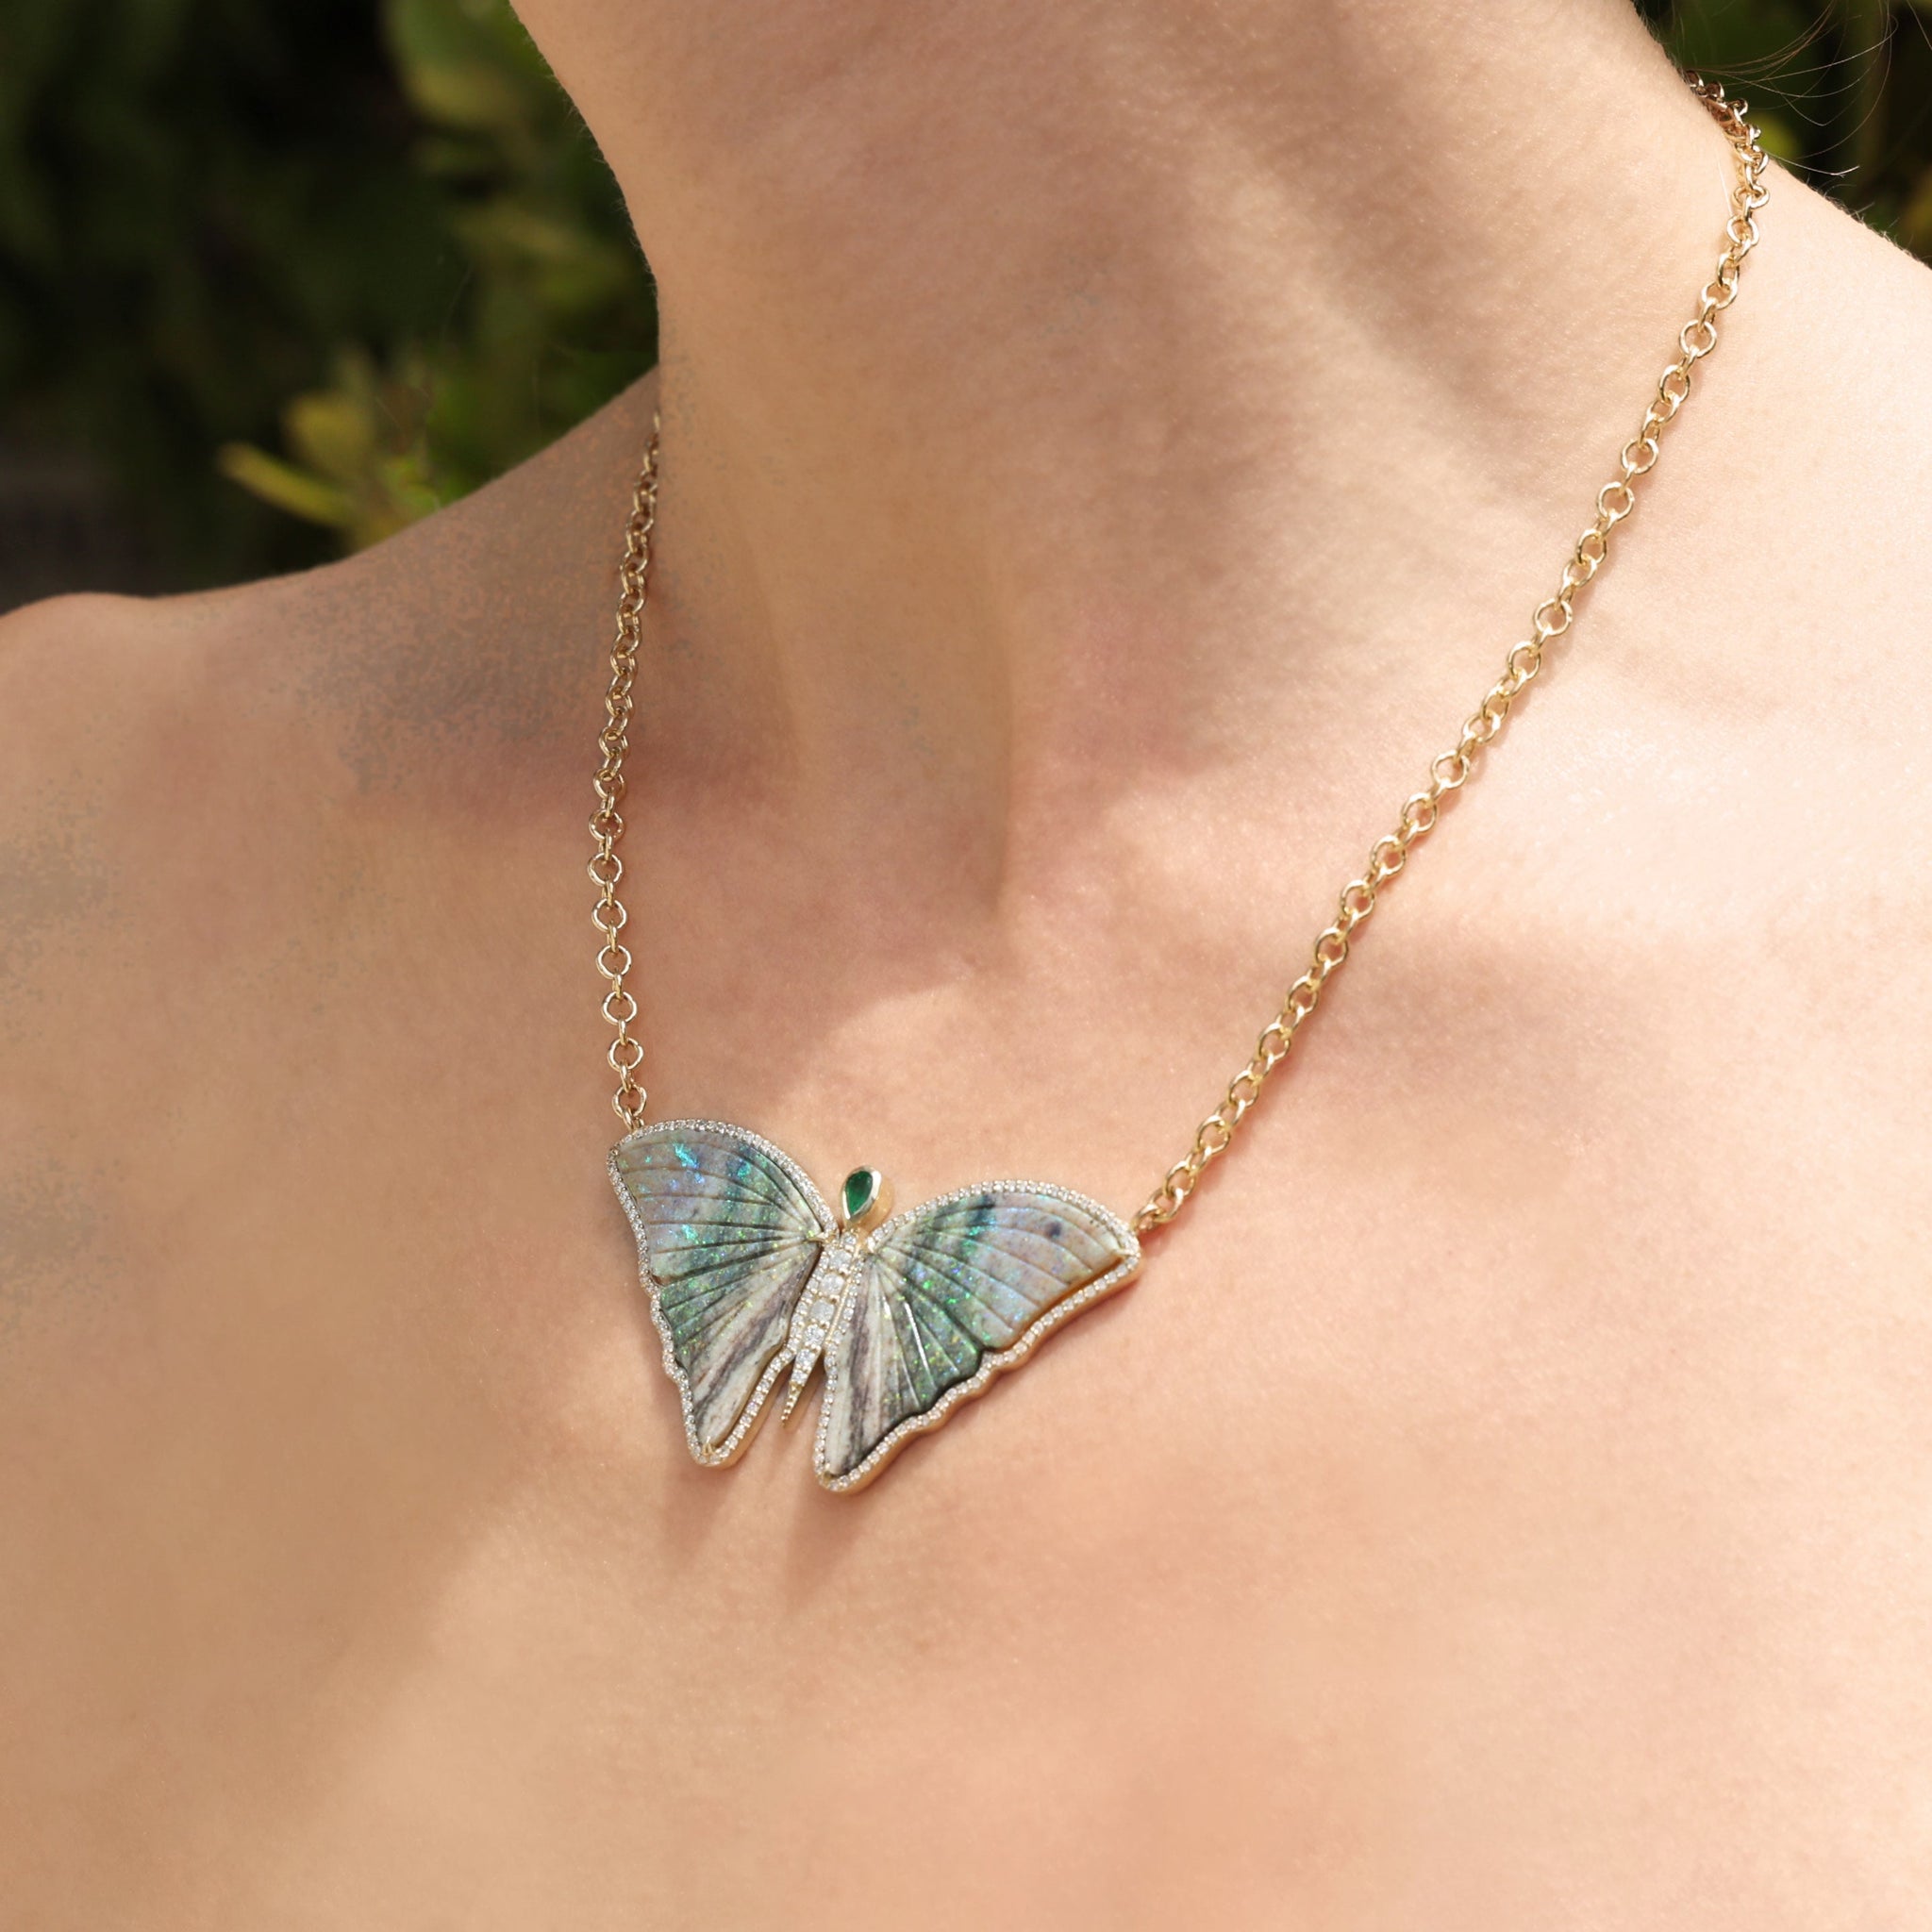 One of a Kind Australian Opal and Emerald Butterfly Necklace SNG00171 - TBird